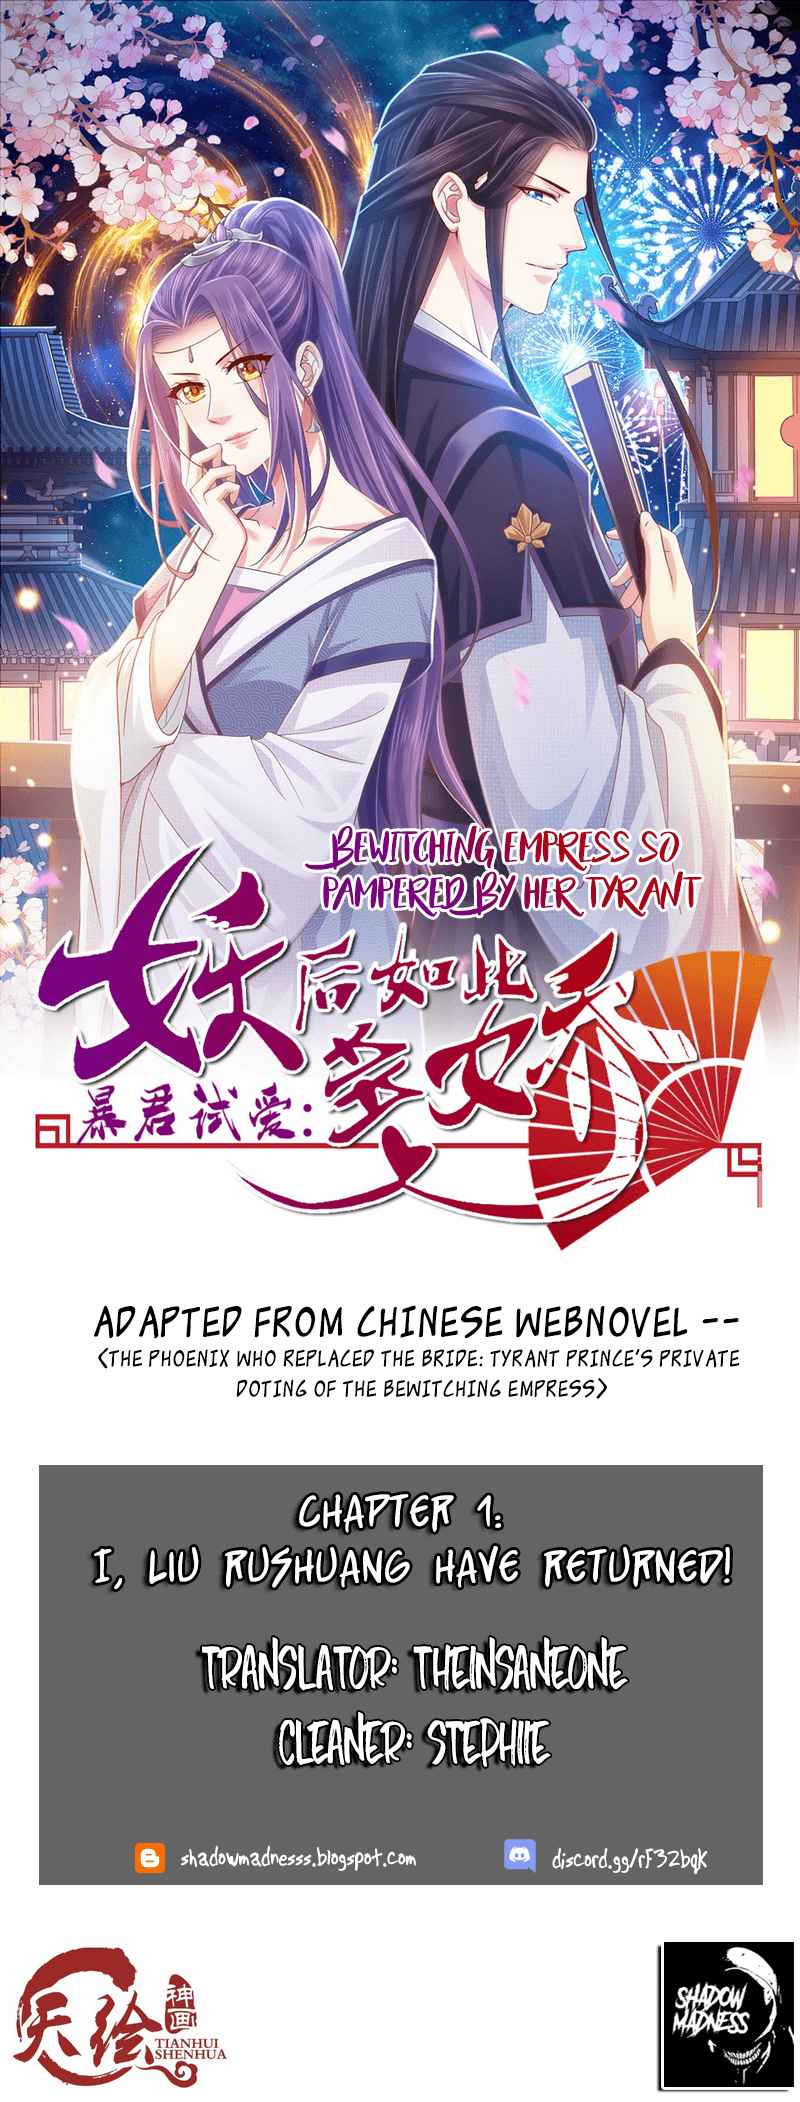 Bewitching Empress so Pampered by Her Tyrant Ch. 1 I, Liu Rushuang have returned!